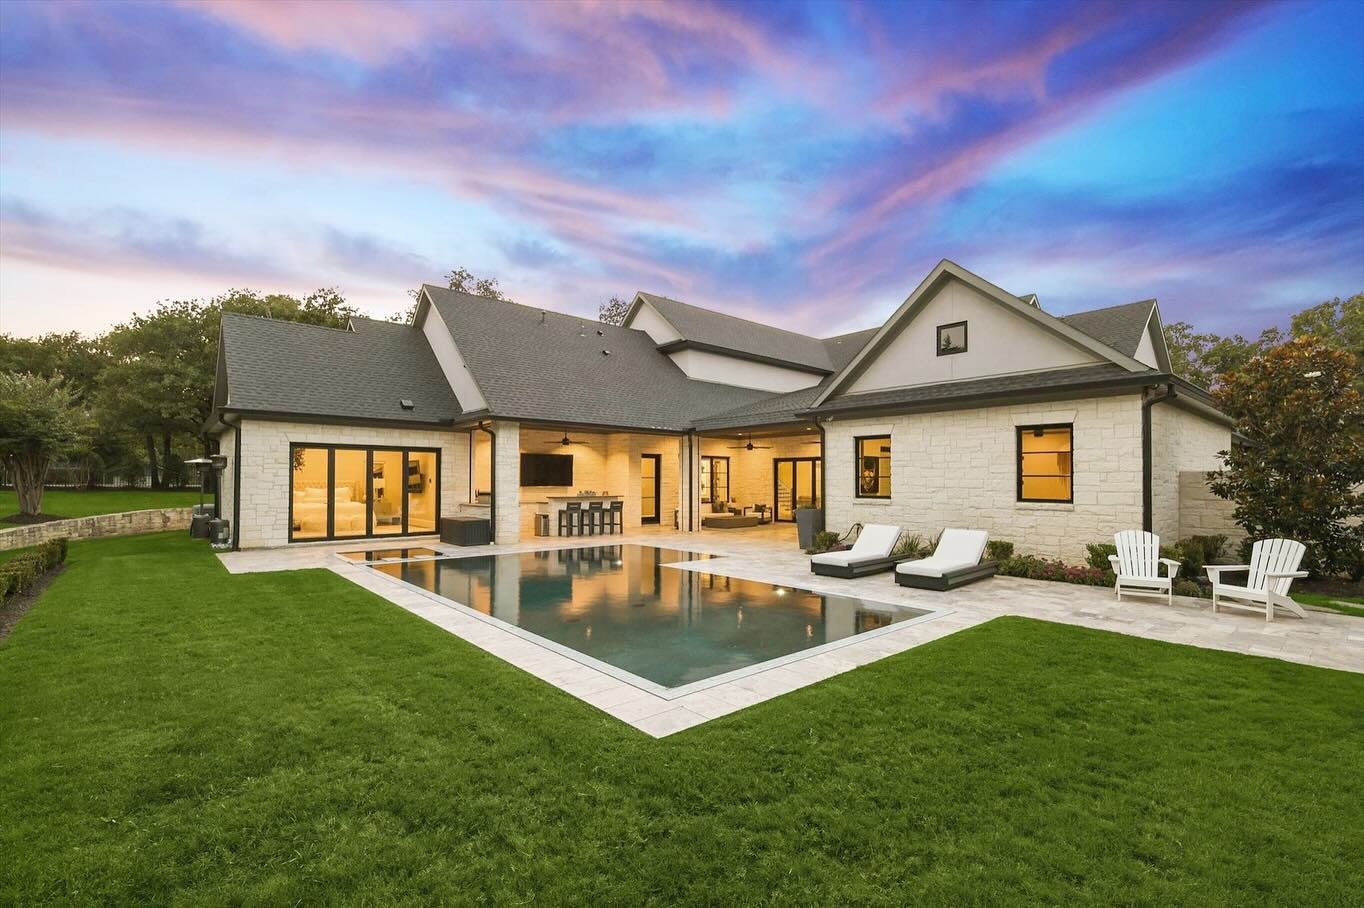 Welcome to your dream oasis! ✨

Experience luxury living at its finest in this stunning Austin stone estate nestled on a 1.3&plusmn; acre corner lot. From the grandeur of cathedral ceilings to the seamless indoor-outdoor flow, every detail exudes ele